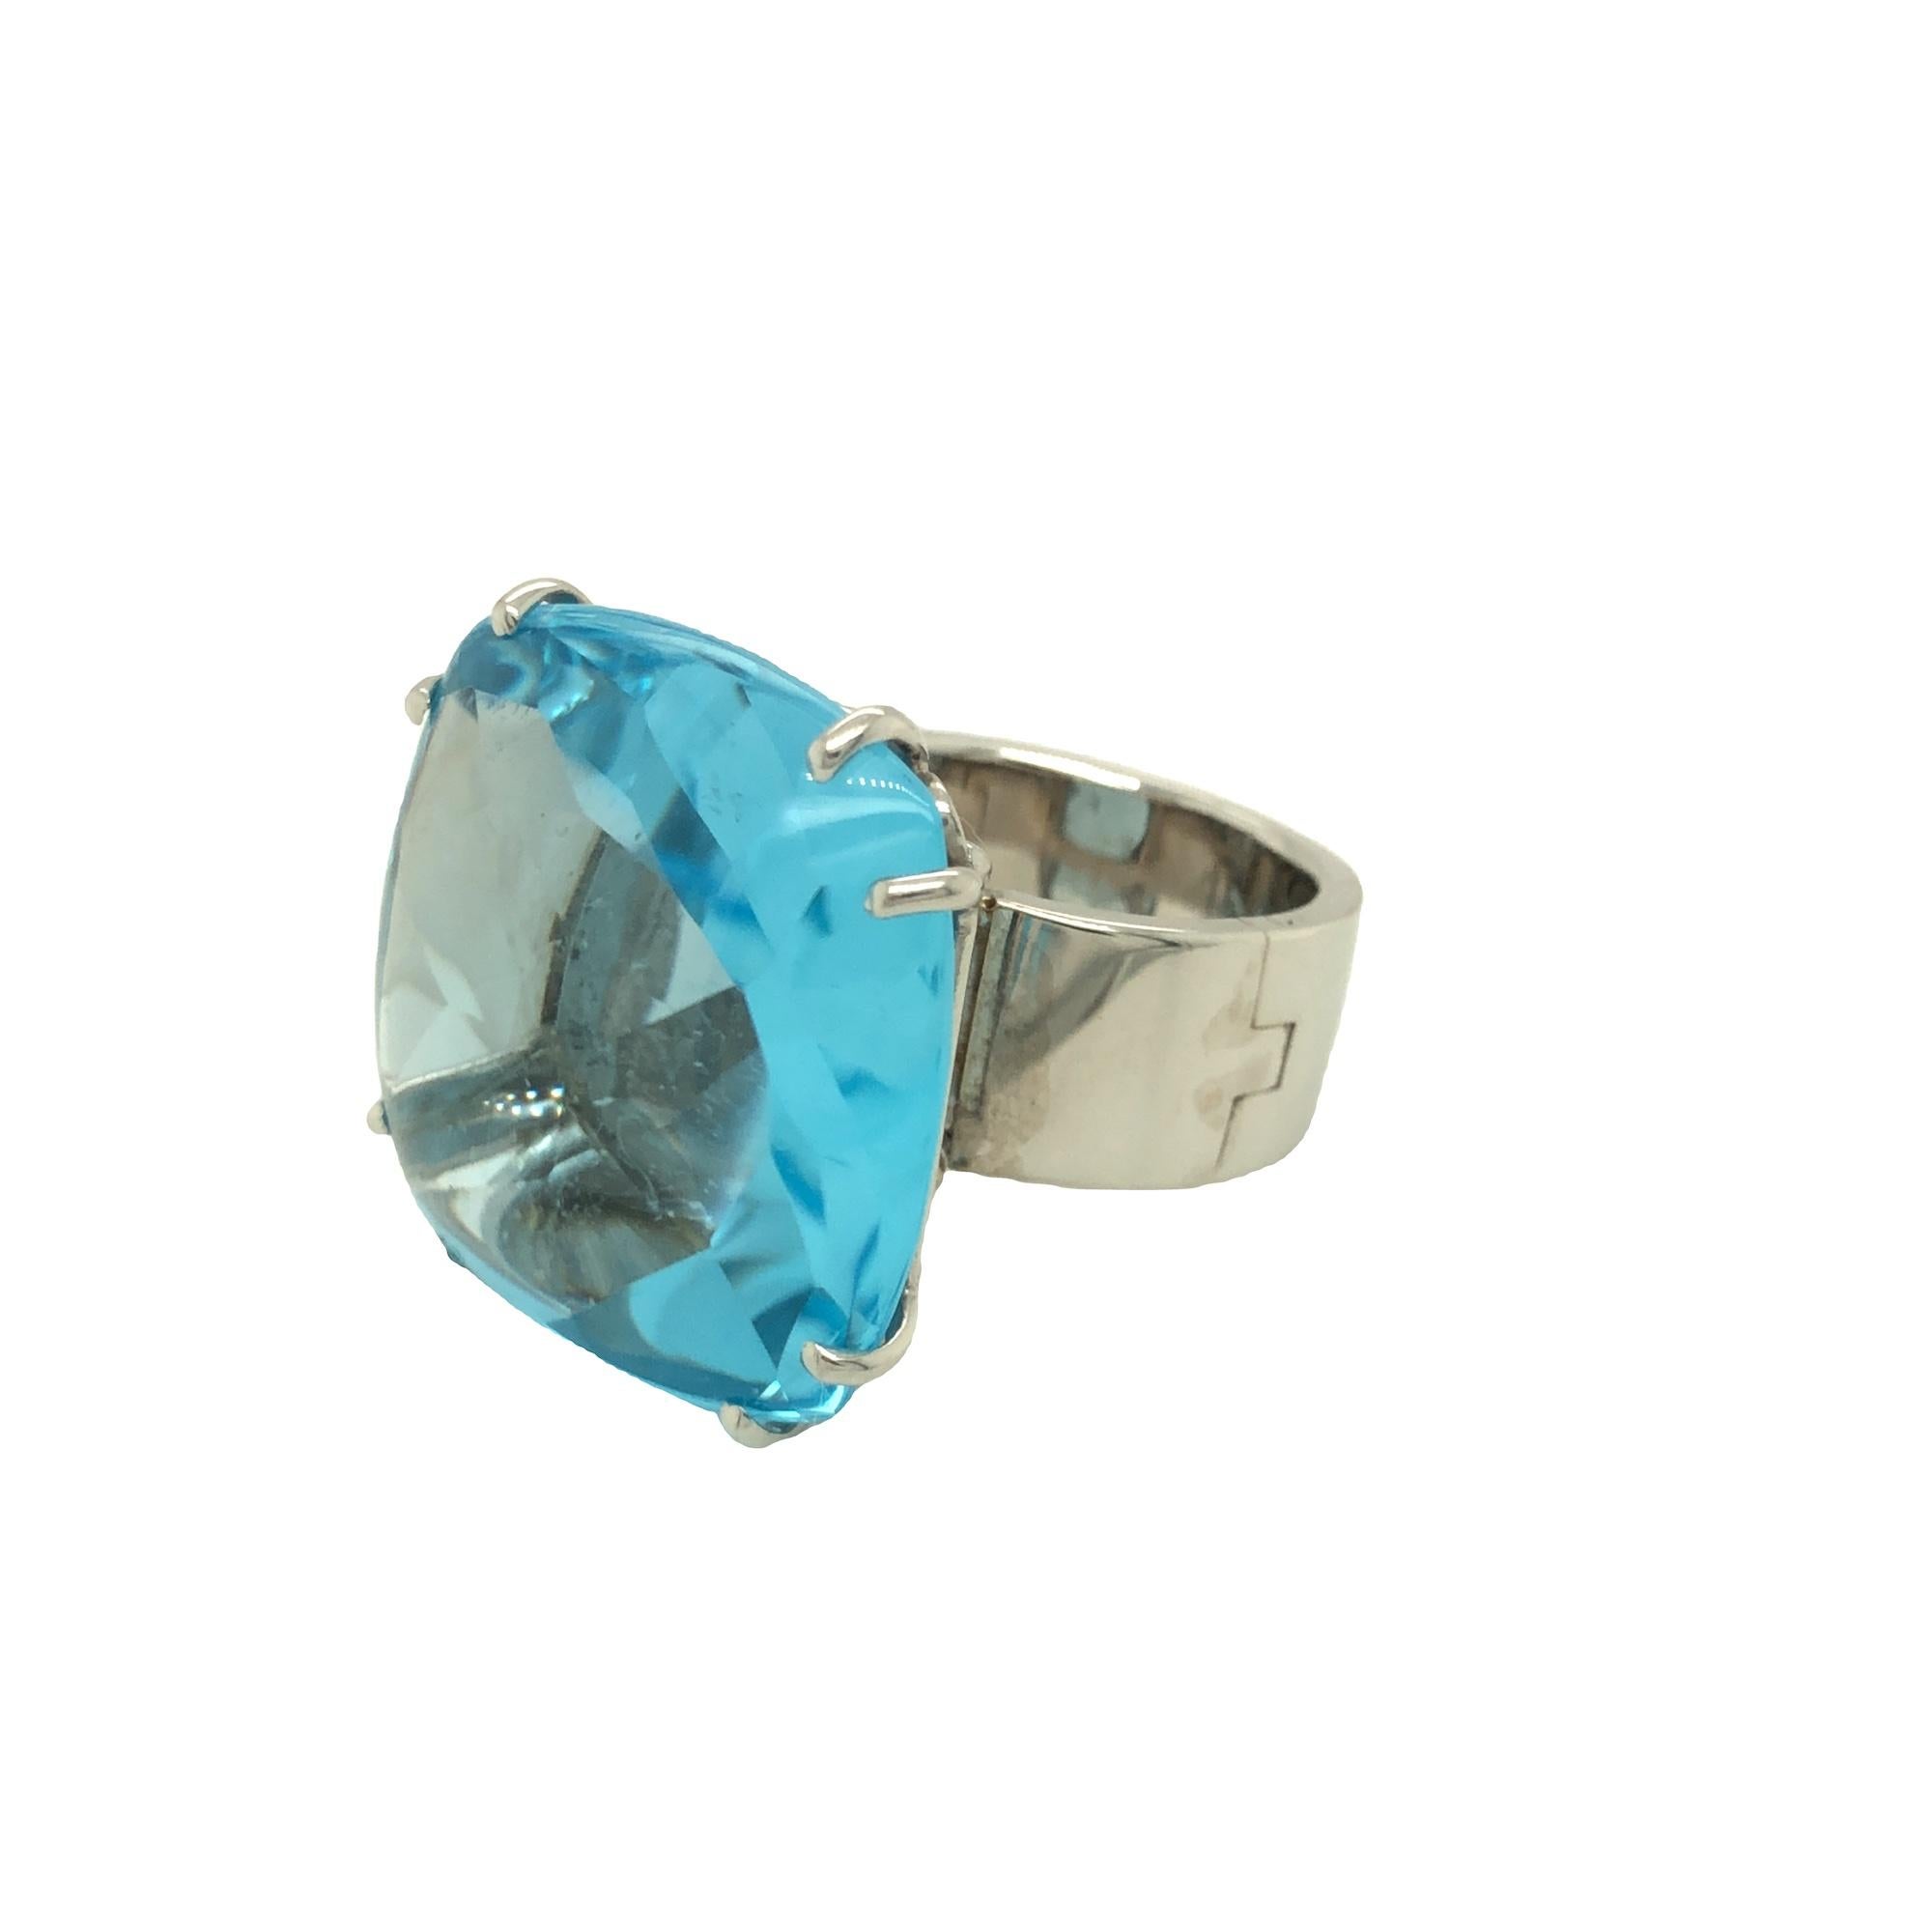 Super Fit Large Square Cabochon Blue Topaz Ring 14K White Gold In Excellent Condition For Sale In beverly hills, CA